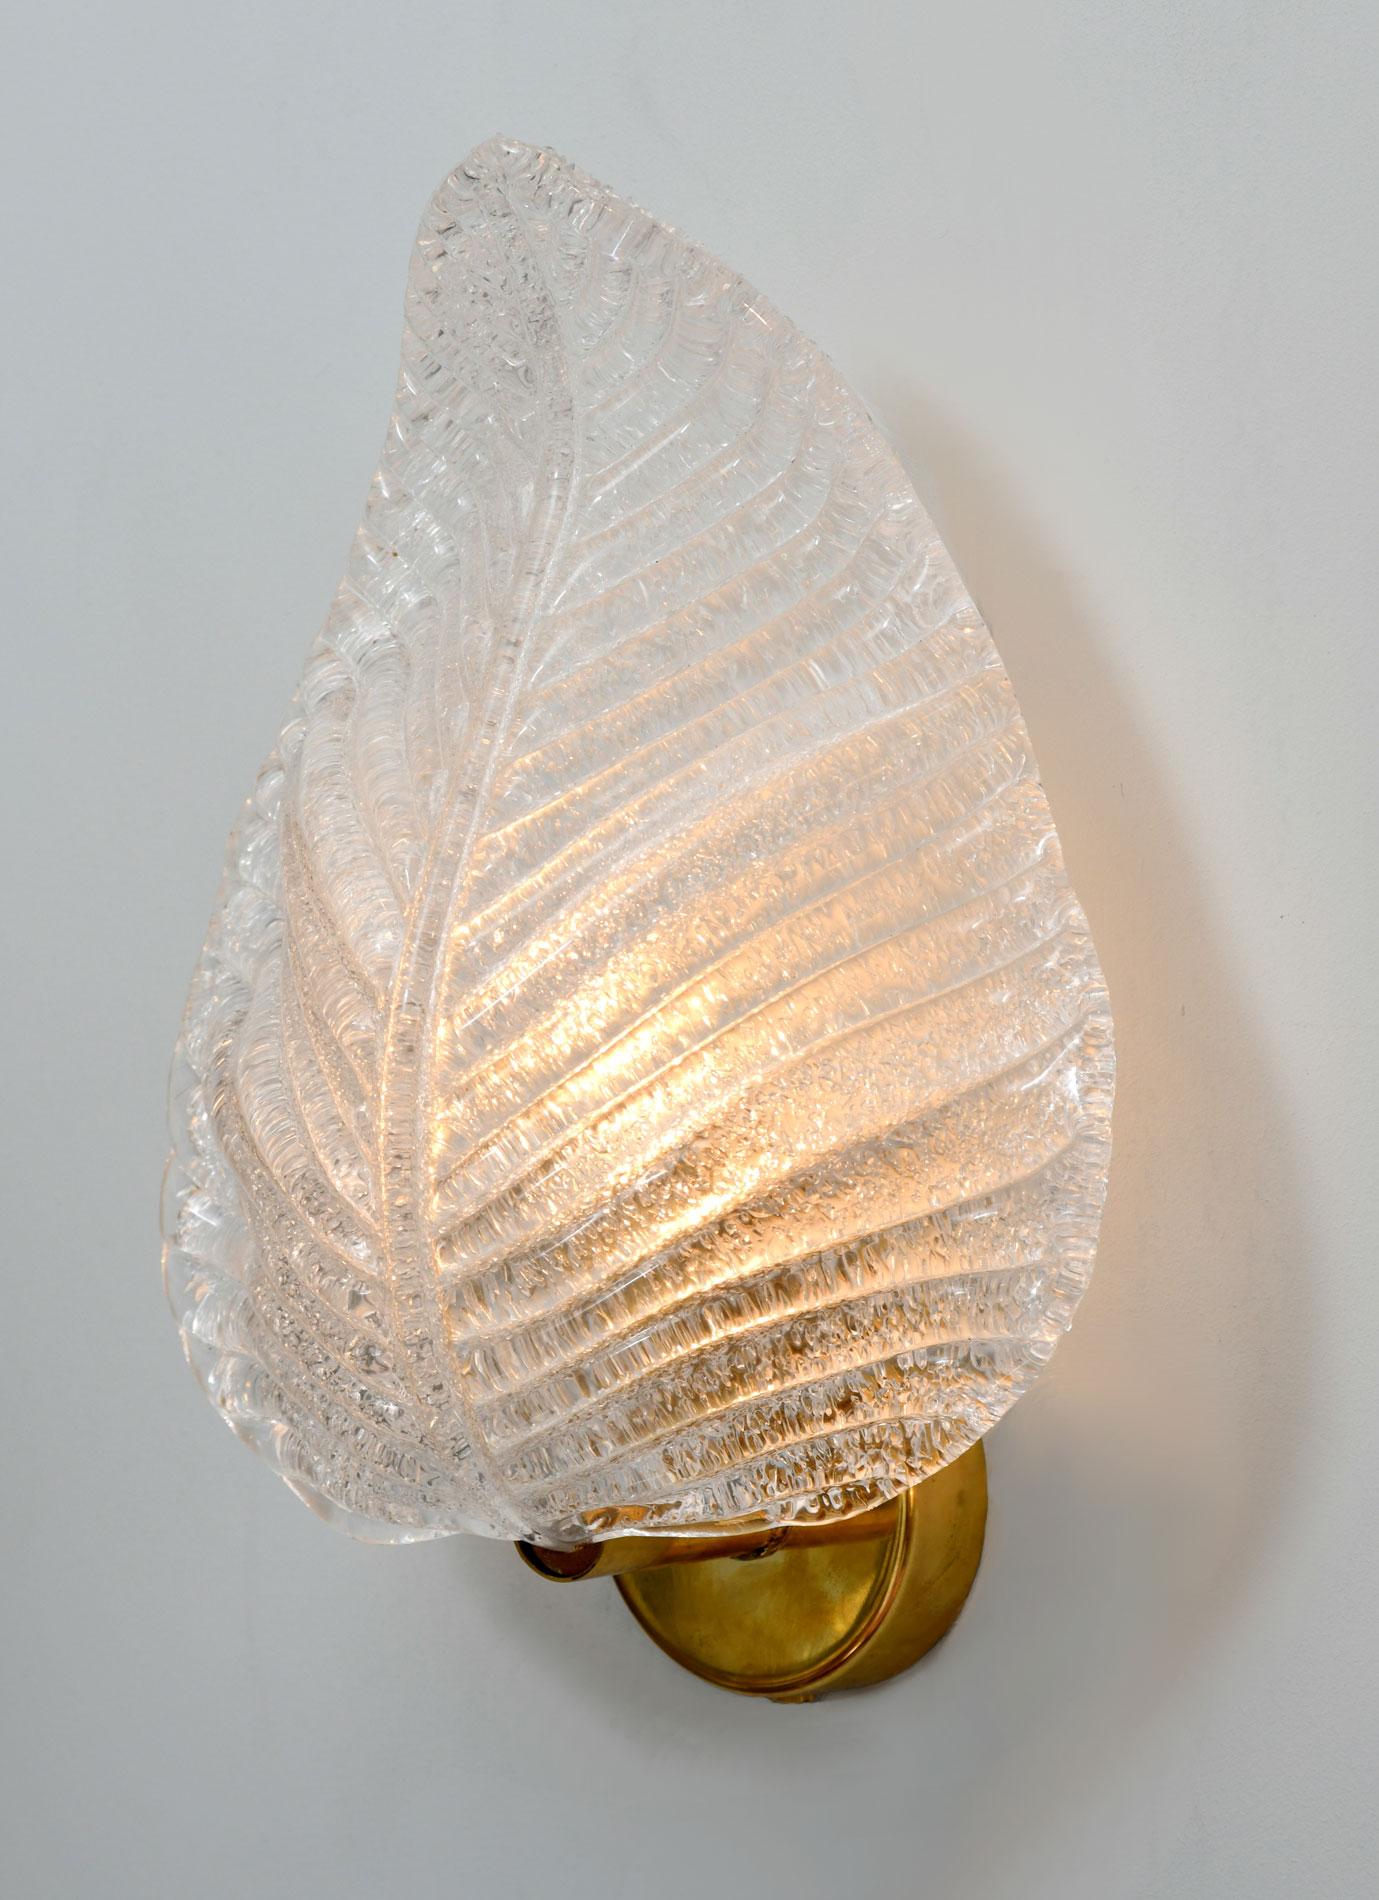 Thick frosted Murano glass sculpted and textured into a leaf. Sits on a circular brass wall fitting. Emits lovely warm light.